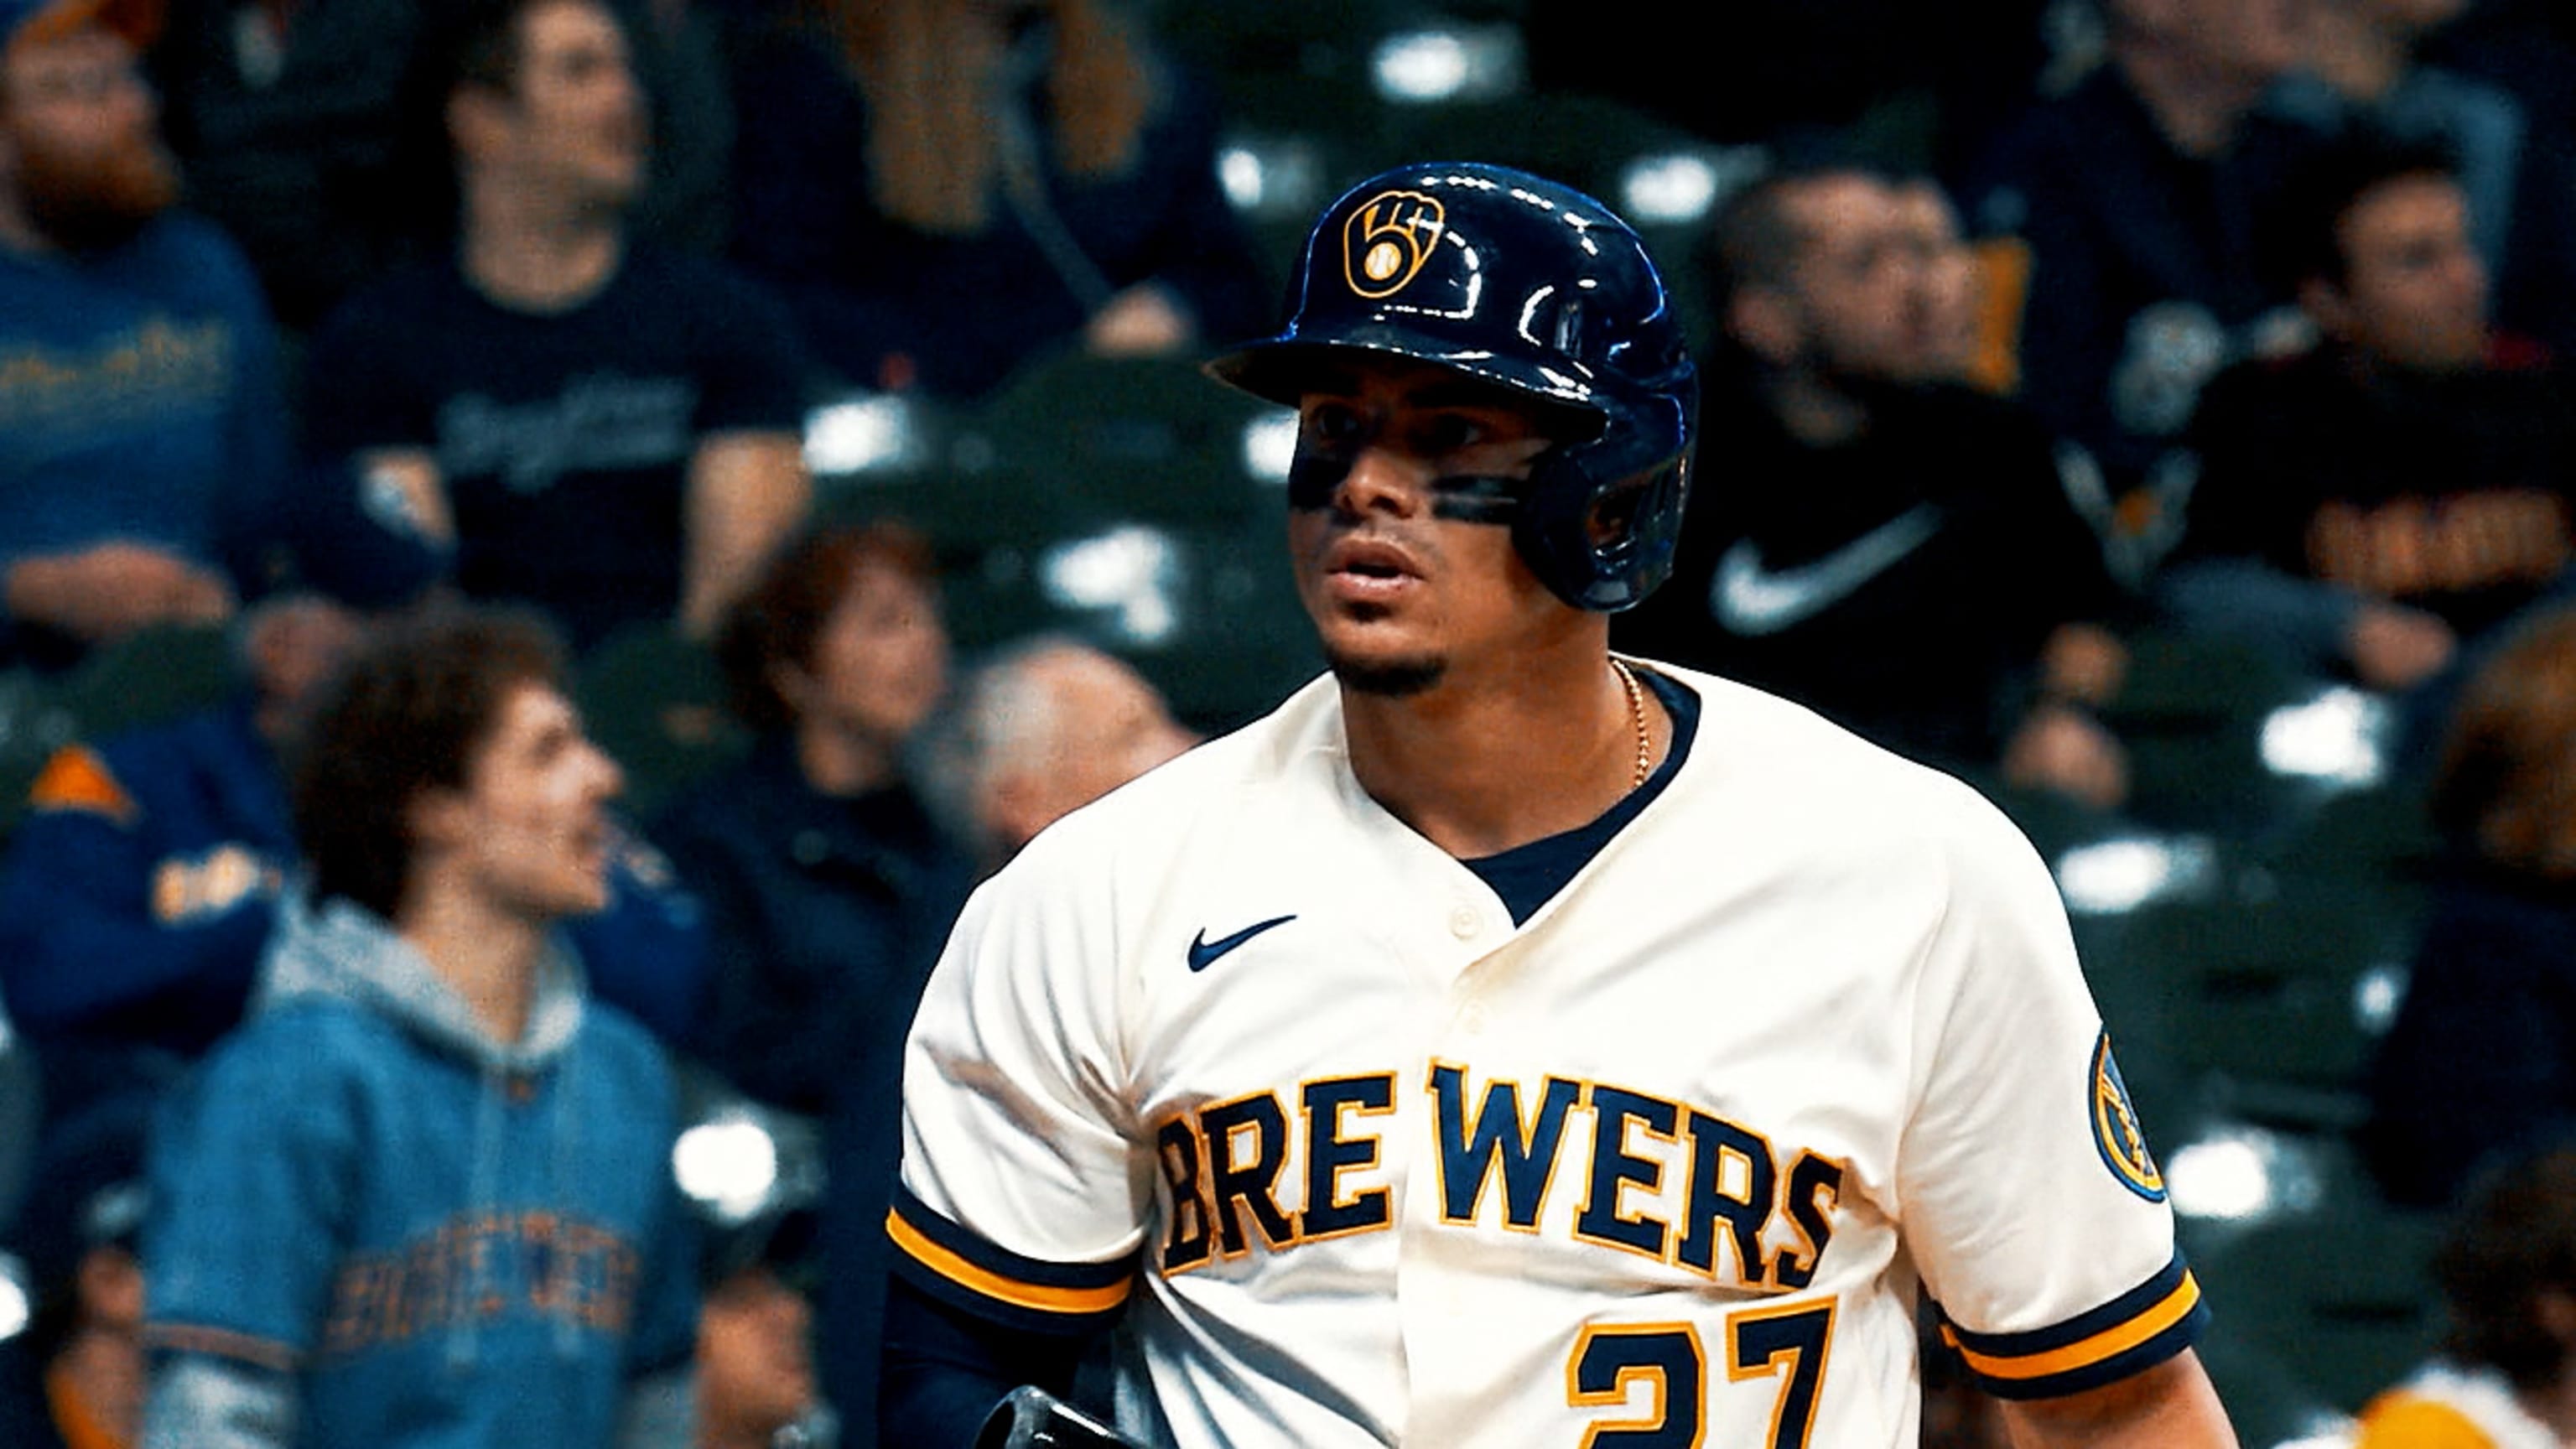 Brewers' Willy Adames earns National League player of the week honors